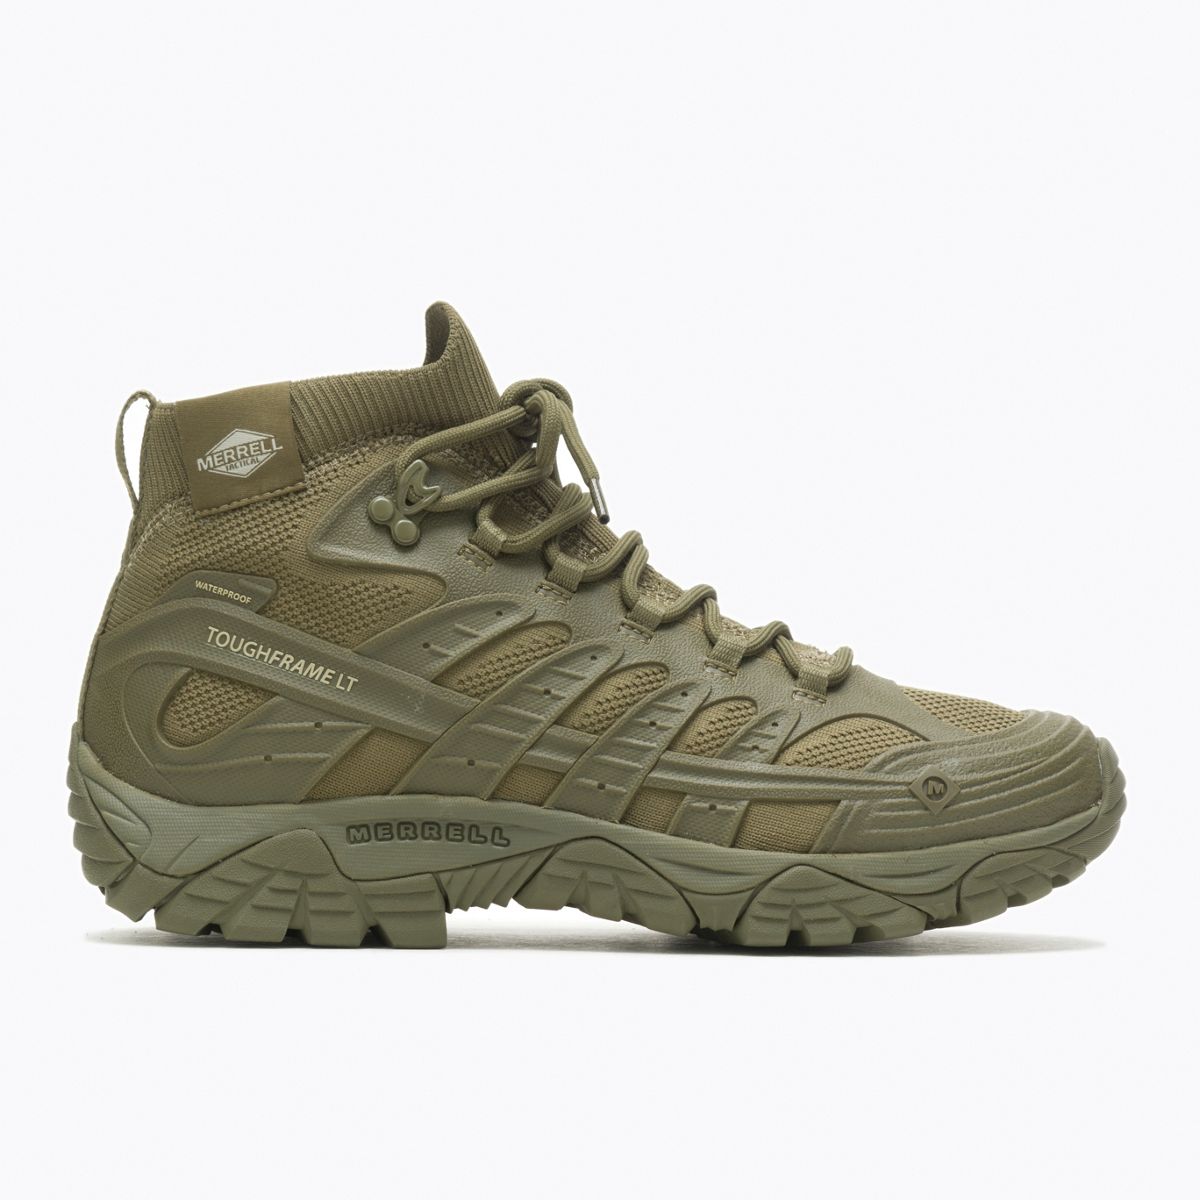 merrell composite toe work shoes